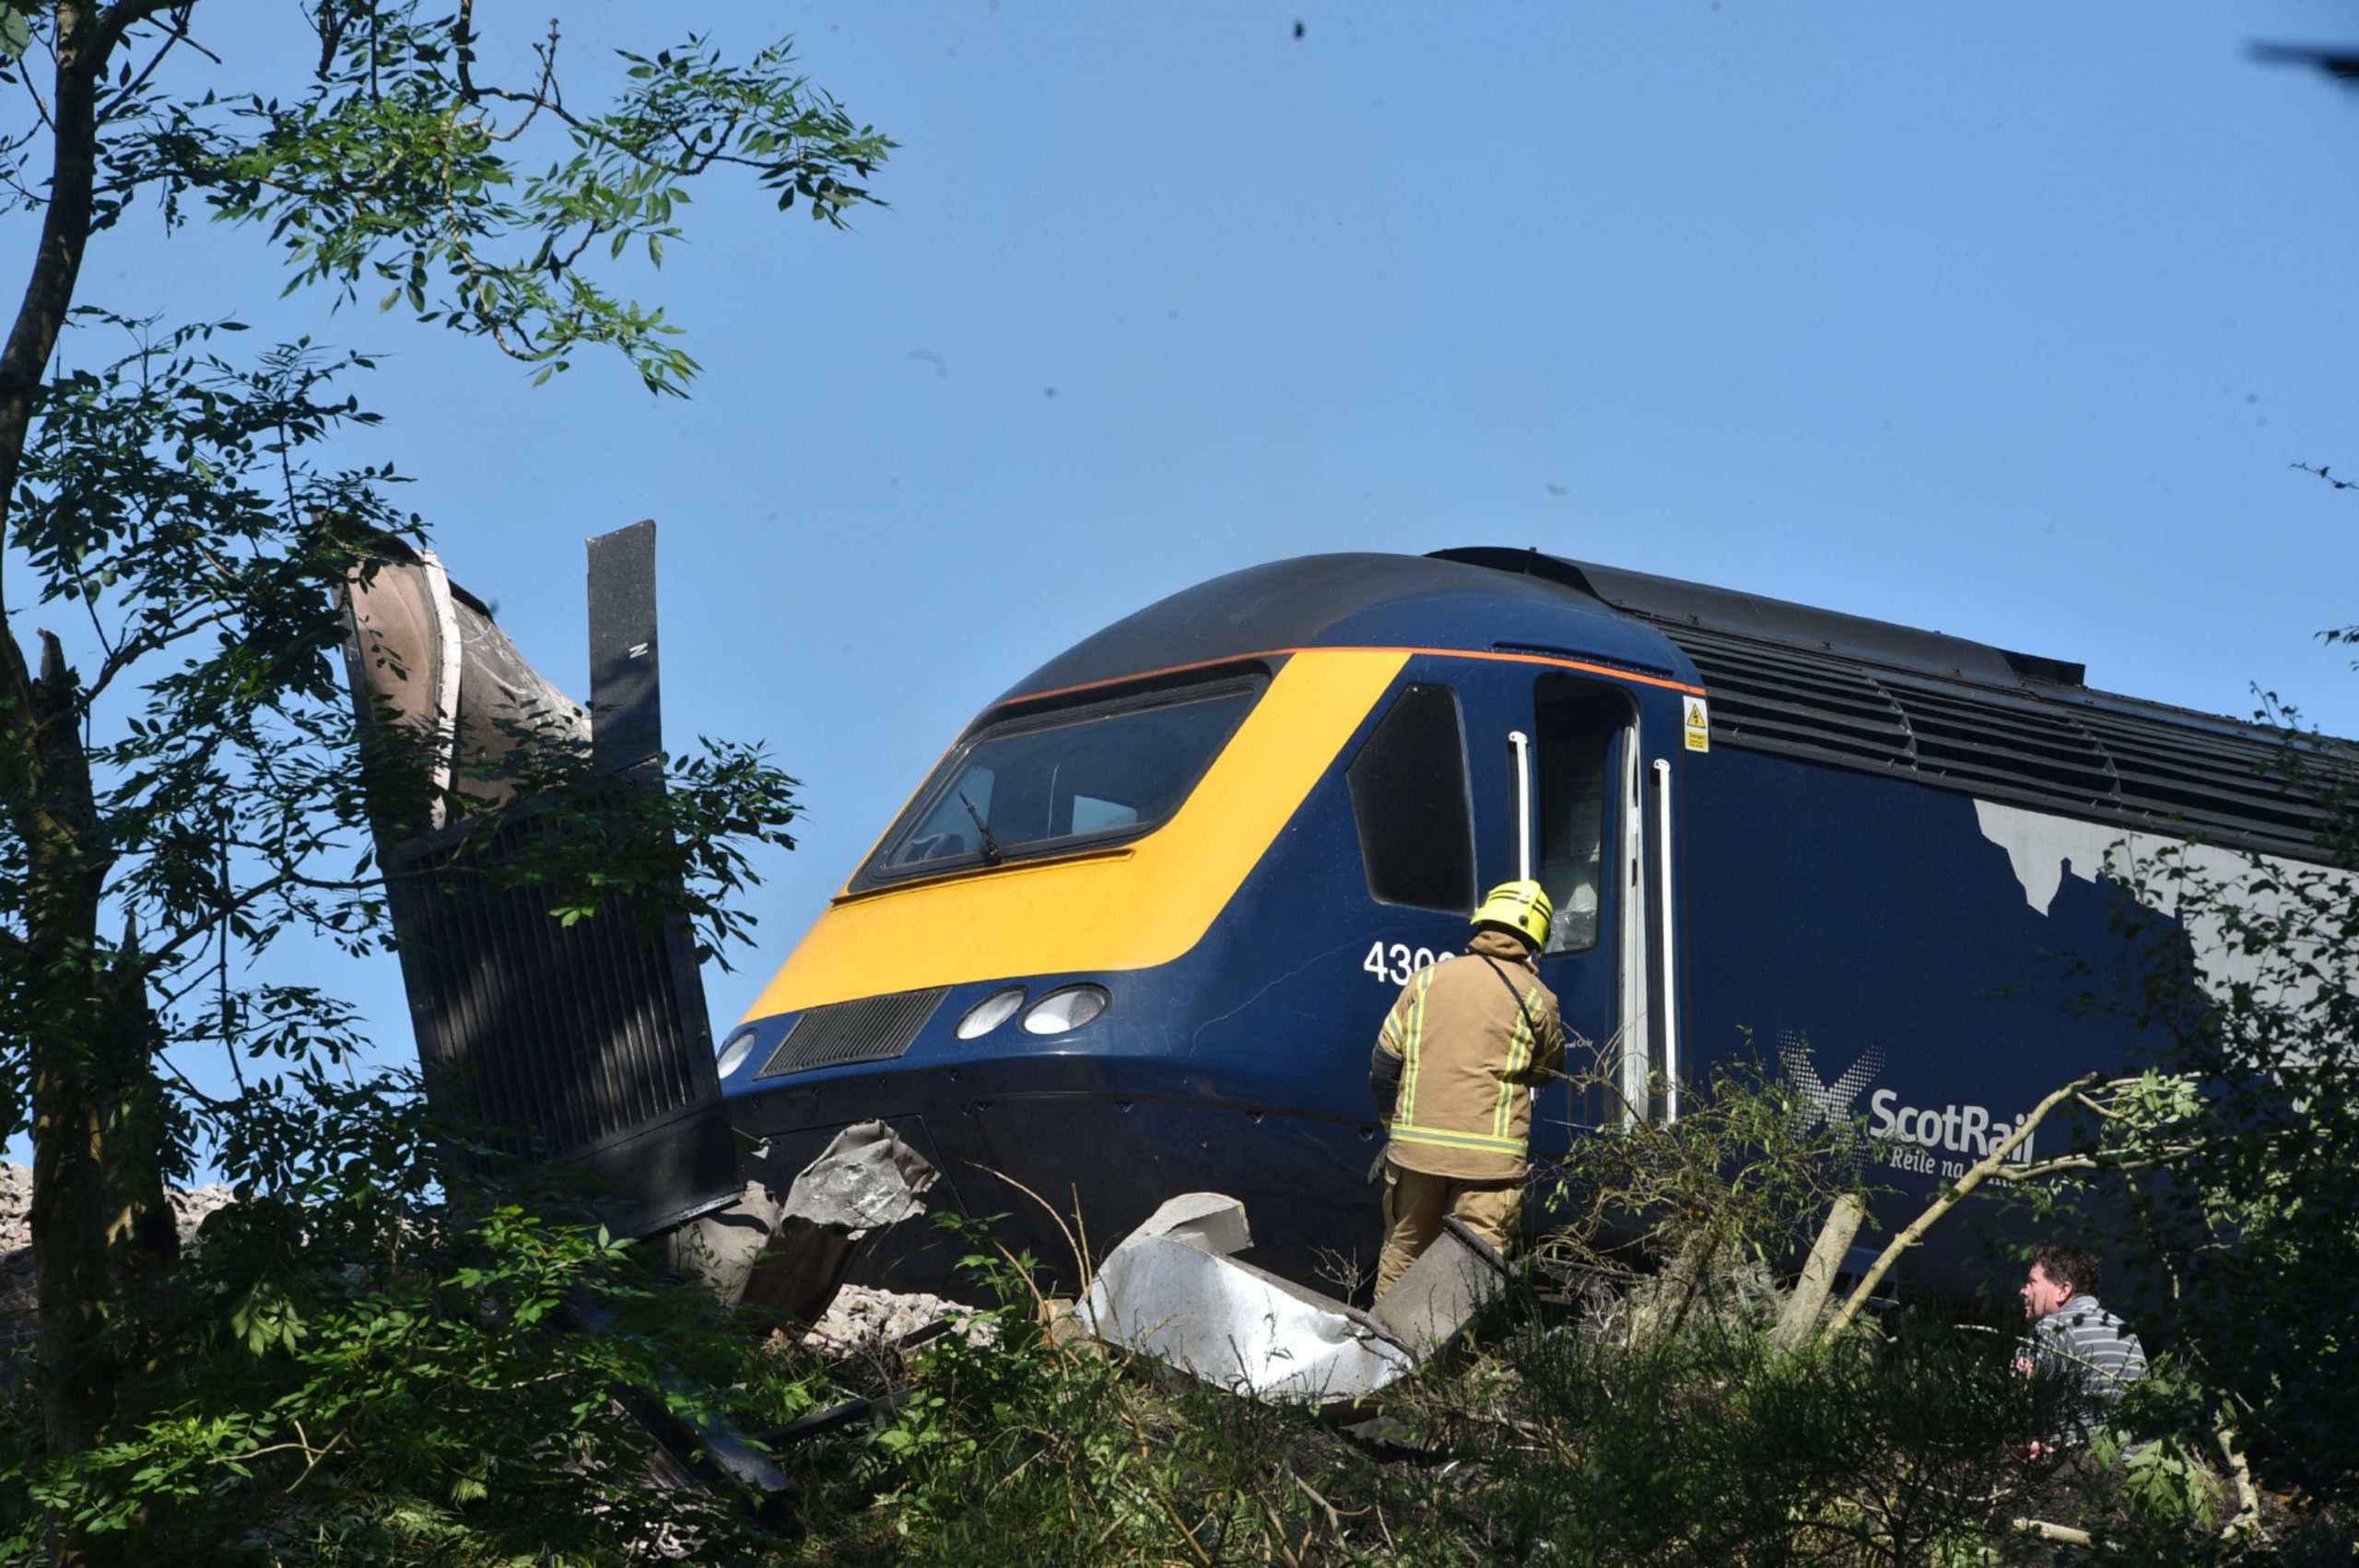 A train derailed near Stonehaven.

Pictures by Darrell Benns 12/08/2020.